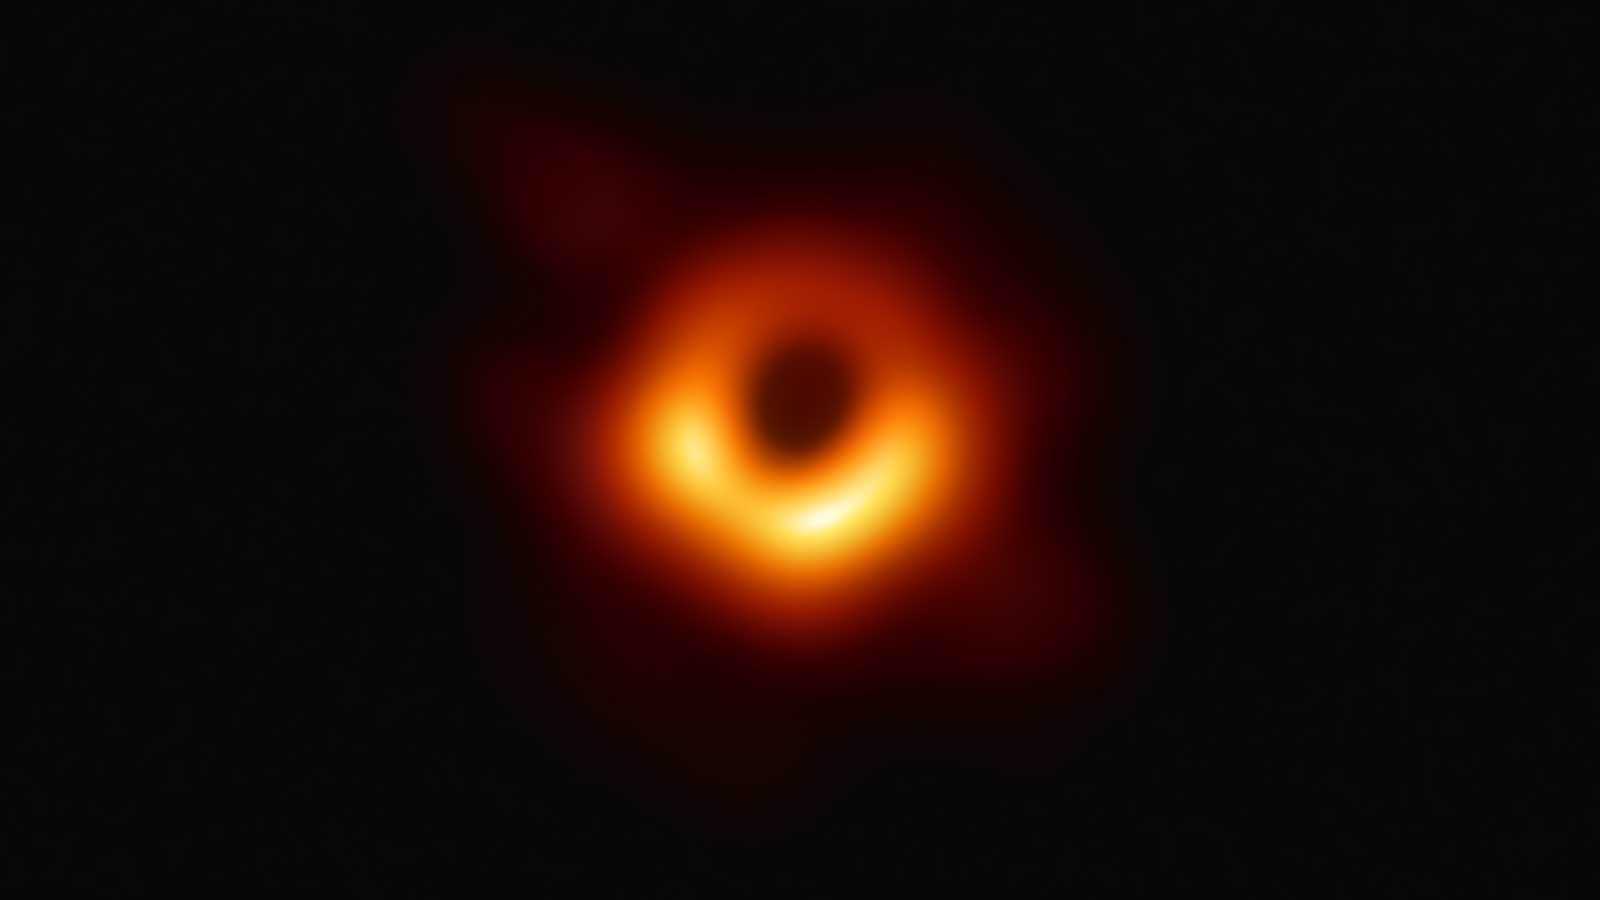 A black hole is seen in the first actual image.